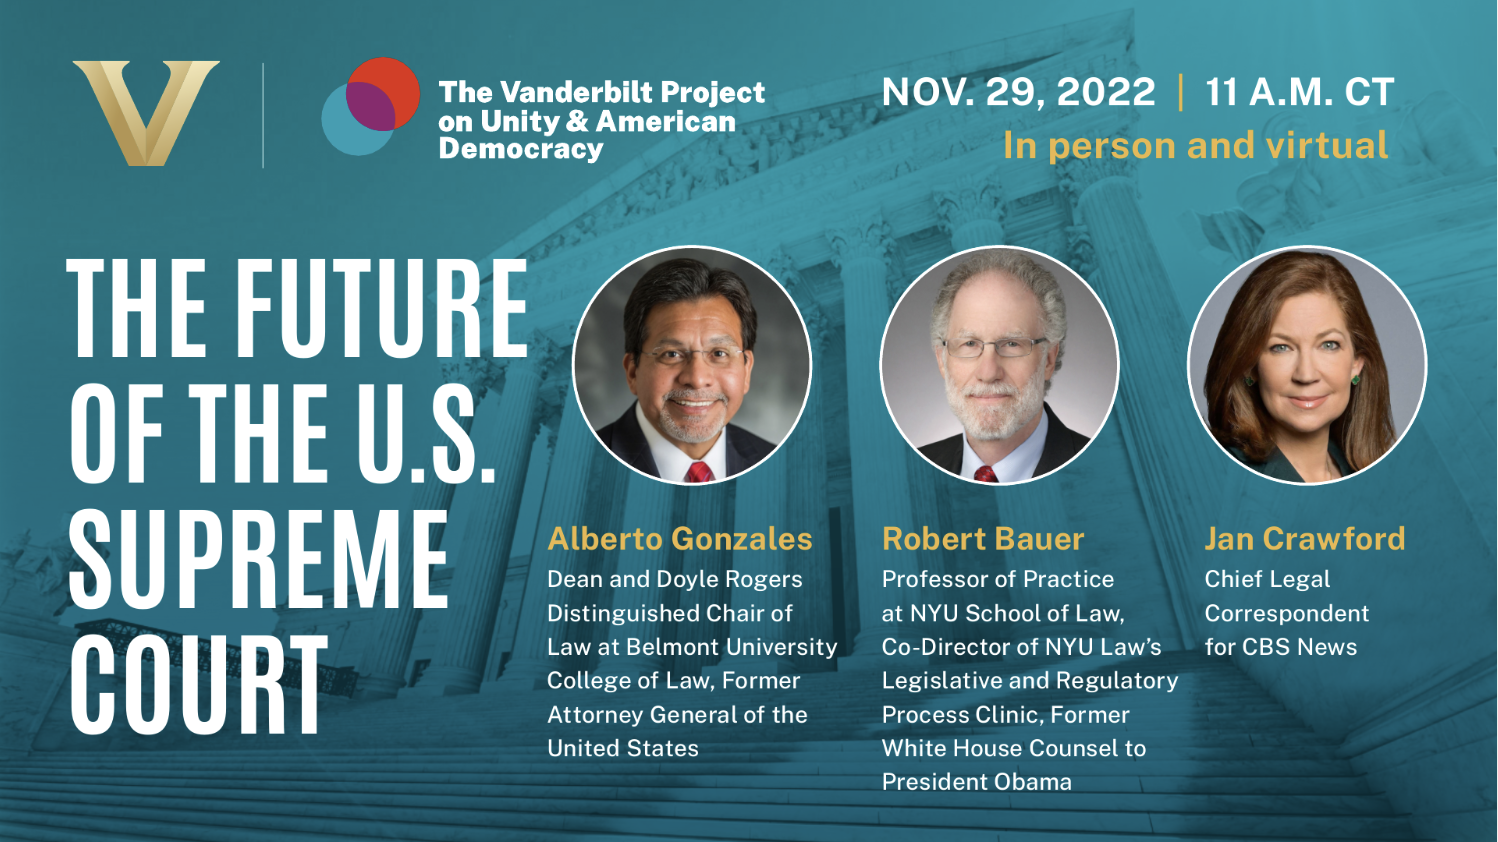 WATCH: ‘The Future of the U.S. Supreme Court’ with CBS’ Jan Crawford and two former White House counsels to be hosted by Vanderbilt Project on Unity and American Democracy Nov. 29